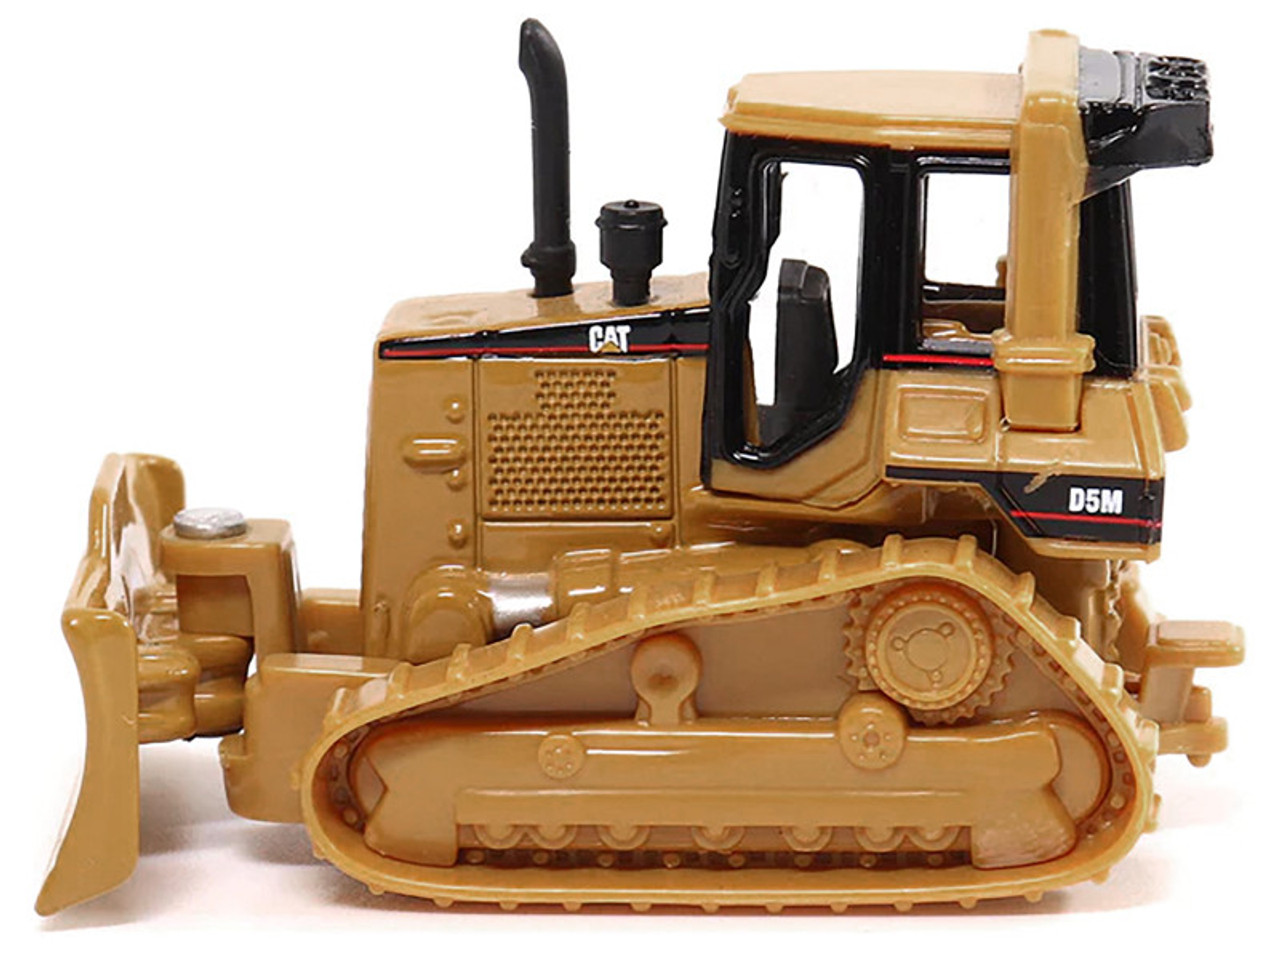 Peterbilt 579 UltraLoft Tandem Tractor Red Metallic with Lowboy Trailer and CAT D5M Dozer Yellow 1/87 (HO) Diecast Model by Diecast Masters